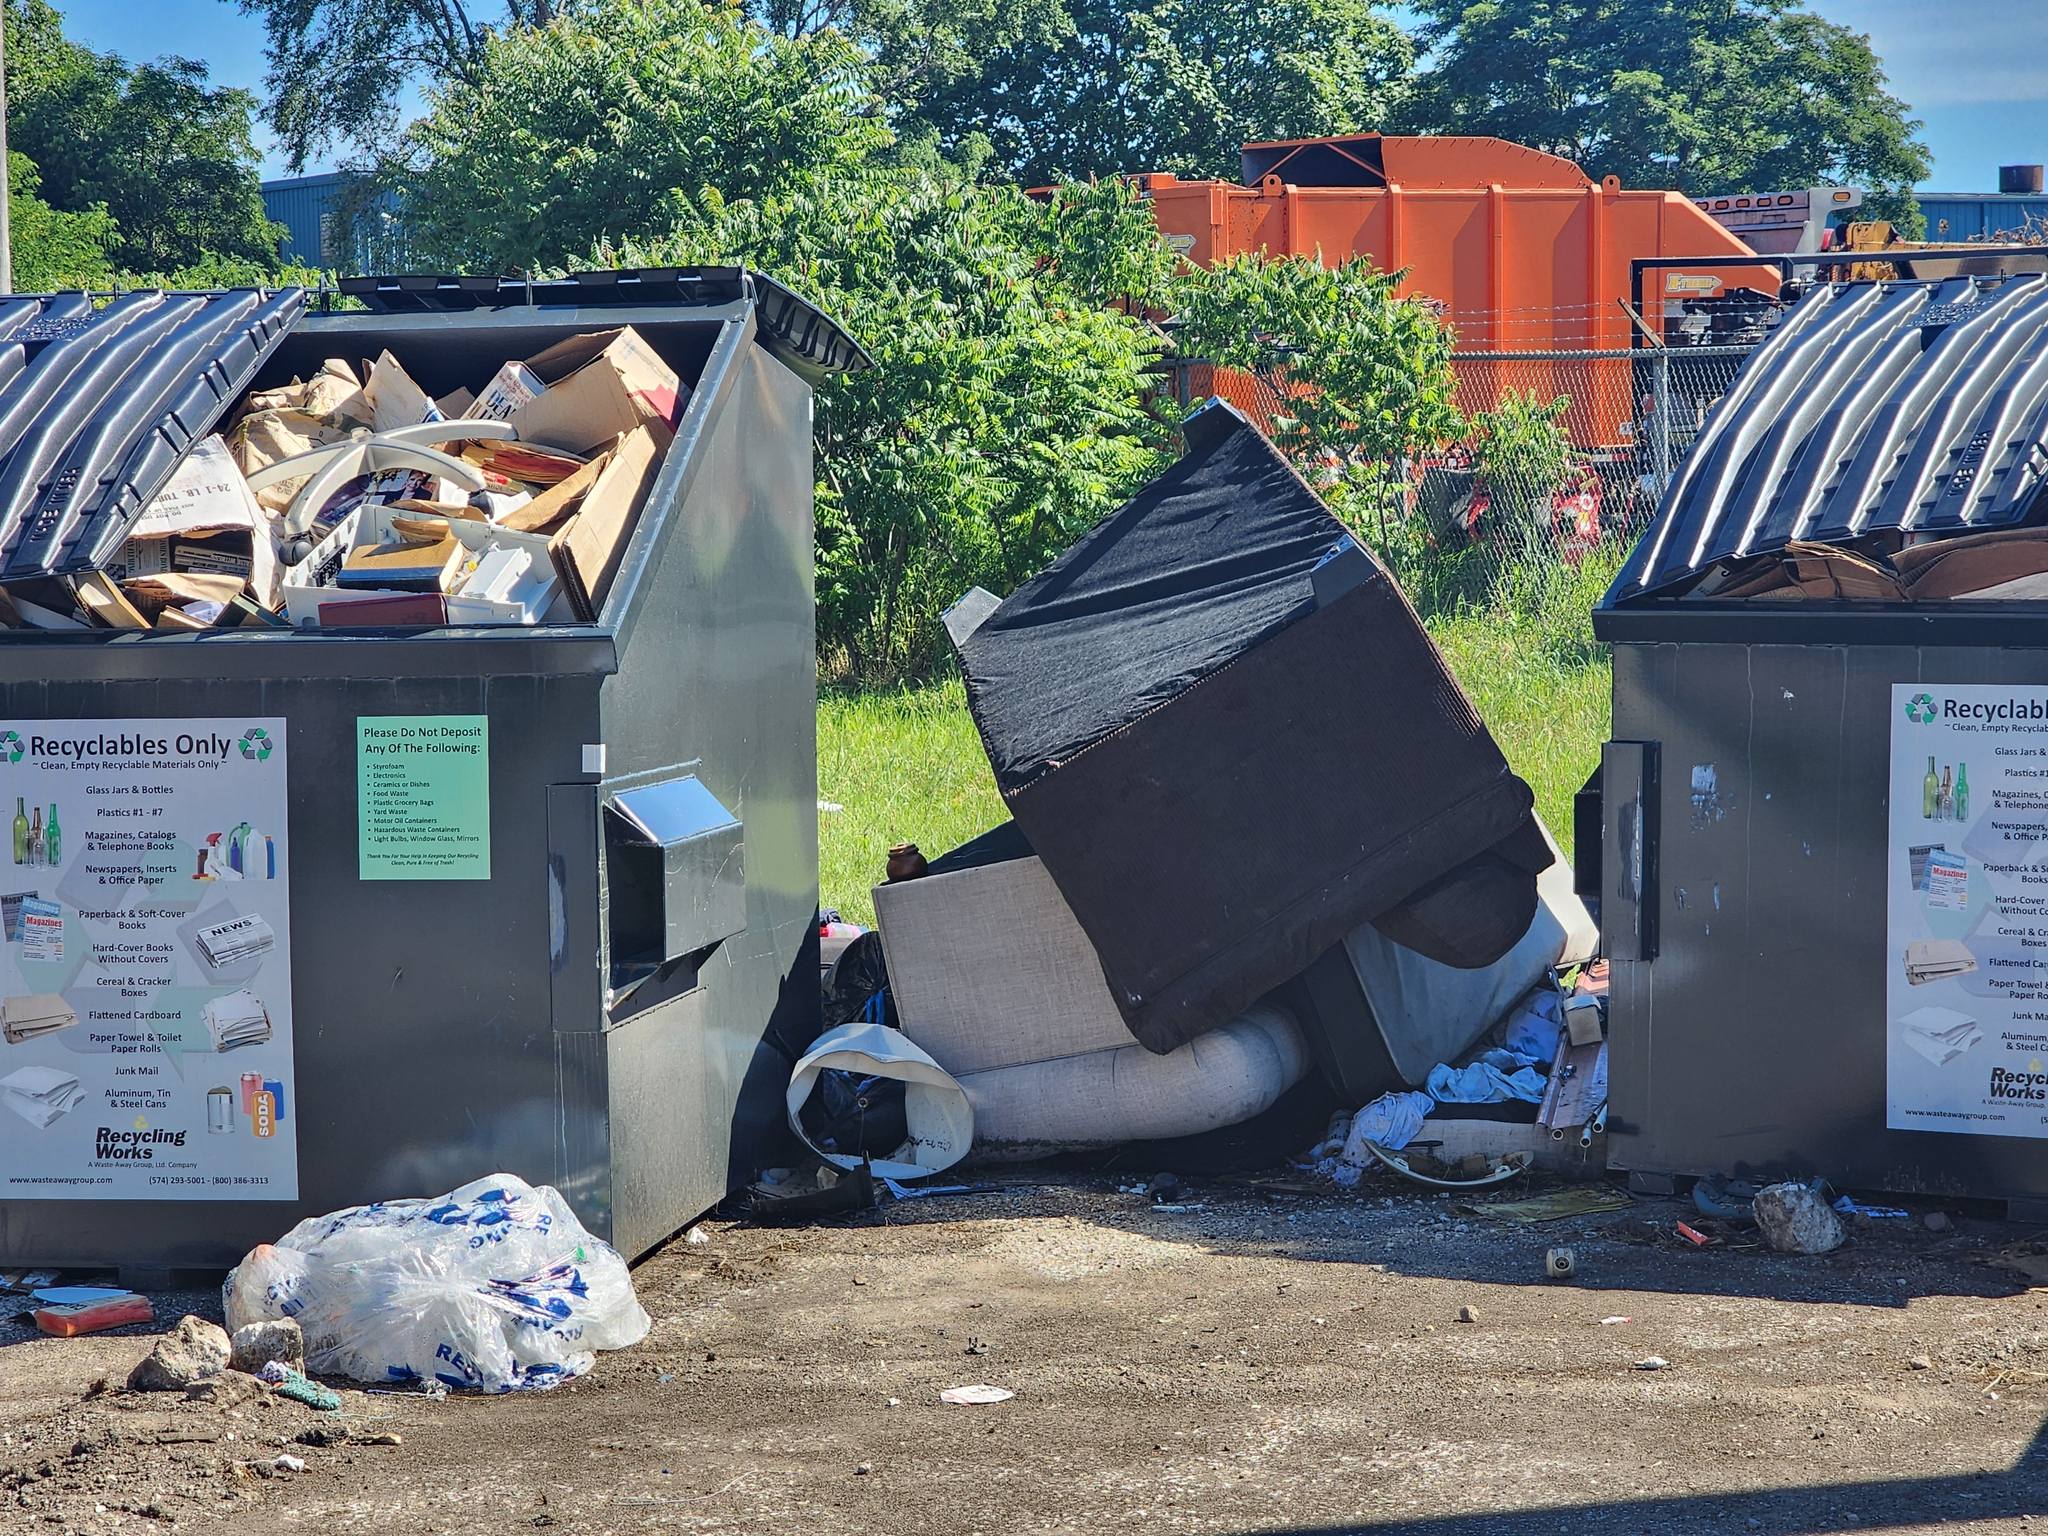 City of Michigan takes action against illegal dumping of waste on public land